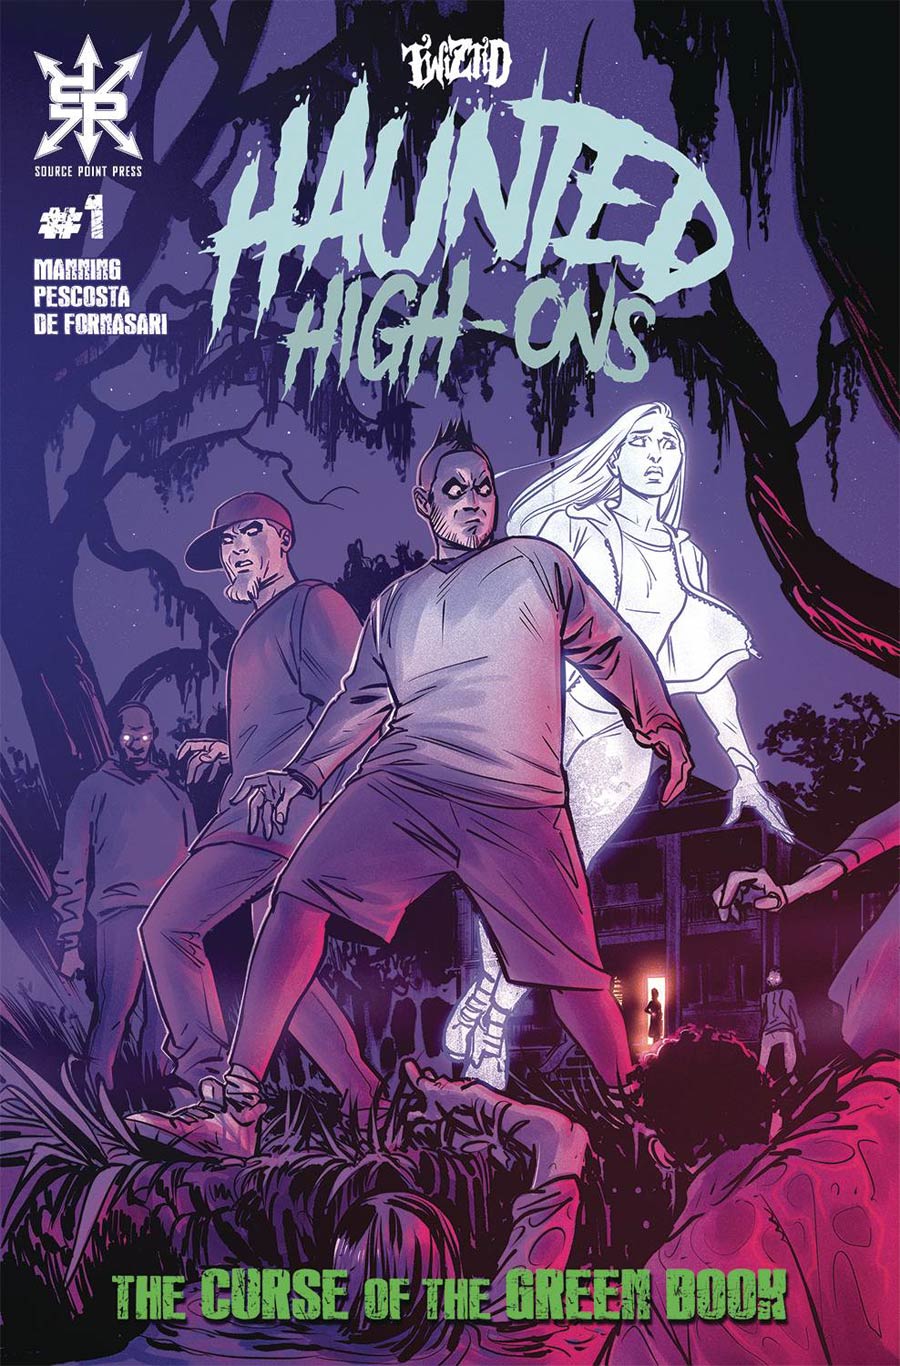 Twiztid Haunted High-Ons The Curse Of The Green Book #1 Cover A Regular Marianna Pescosta Cover